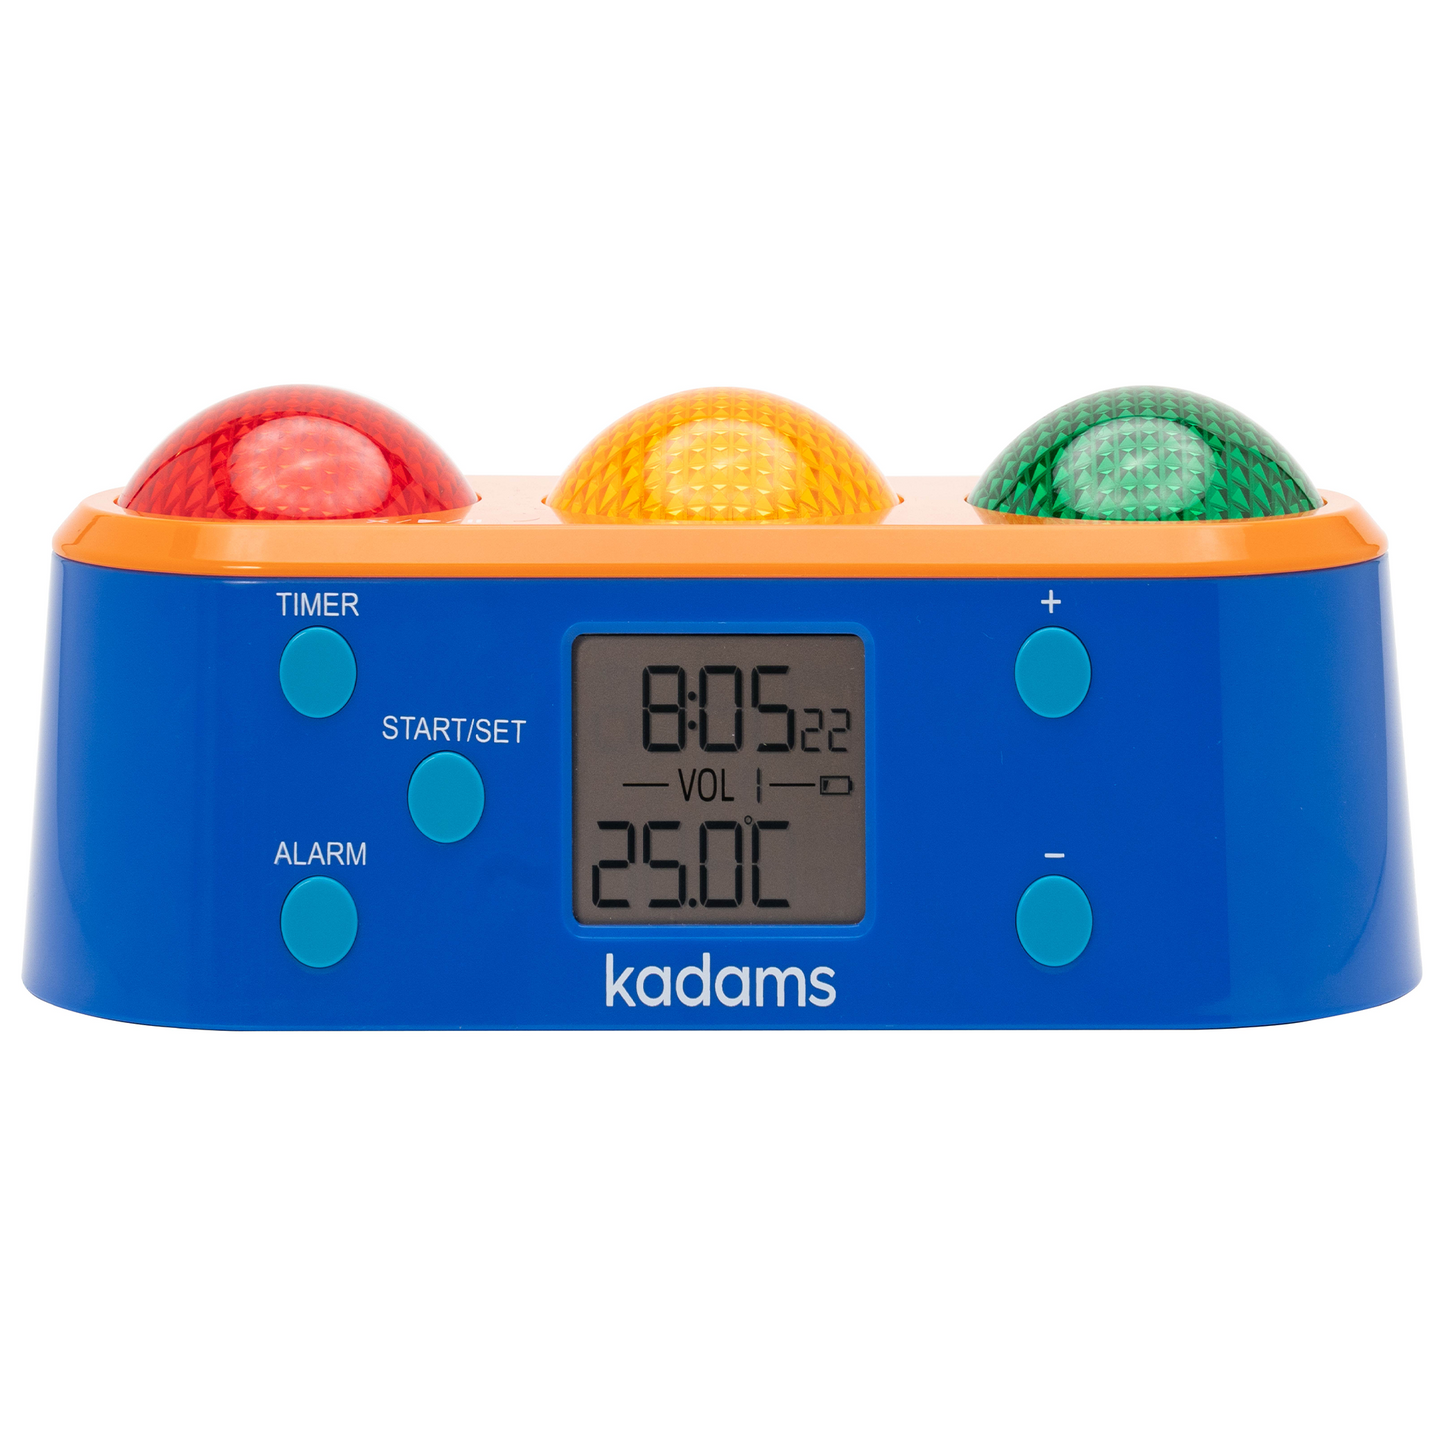 Kadams Visual Timer for Kids with Audio Alarm - Digital Timer for Classroom Teachers Toddler Productivity Time Management Tool Traffic Light Timer 24hr Countdown Press Pause Special Education Silver